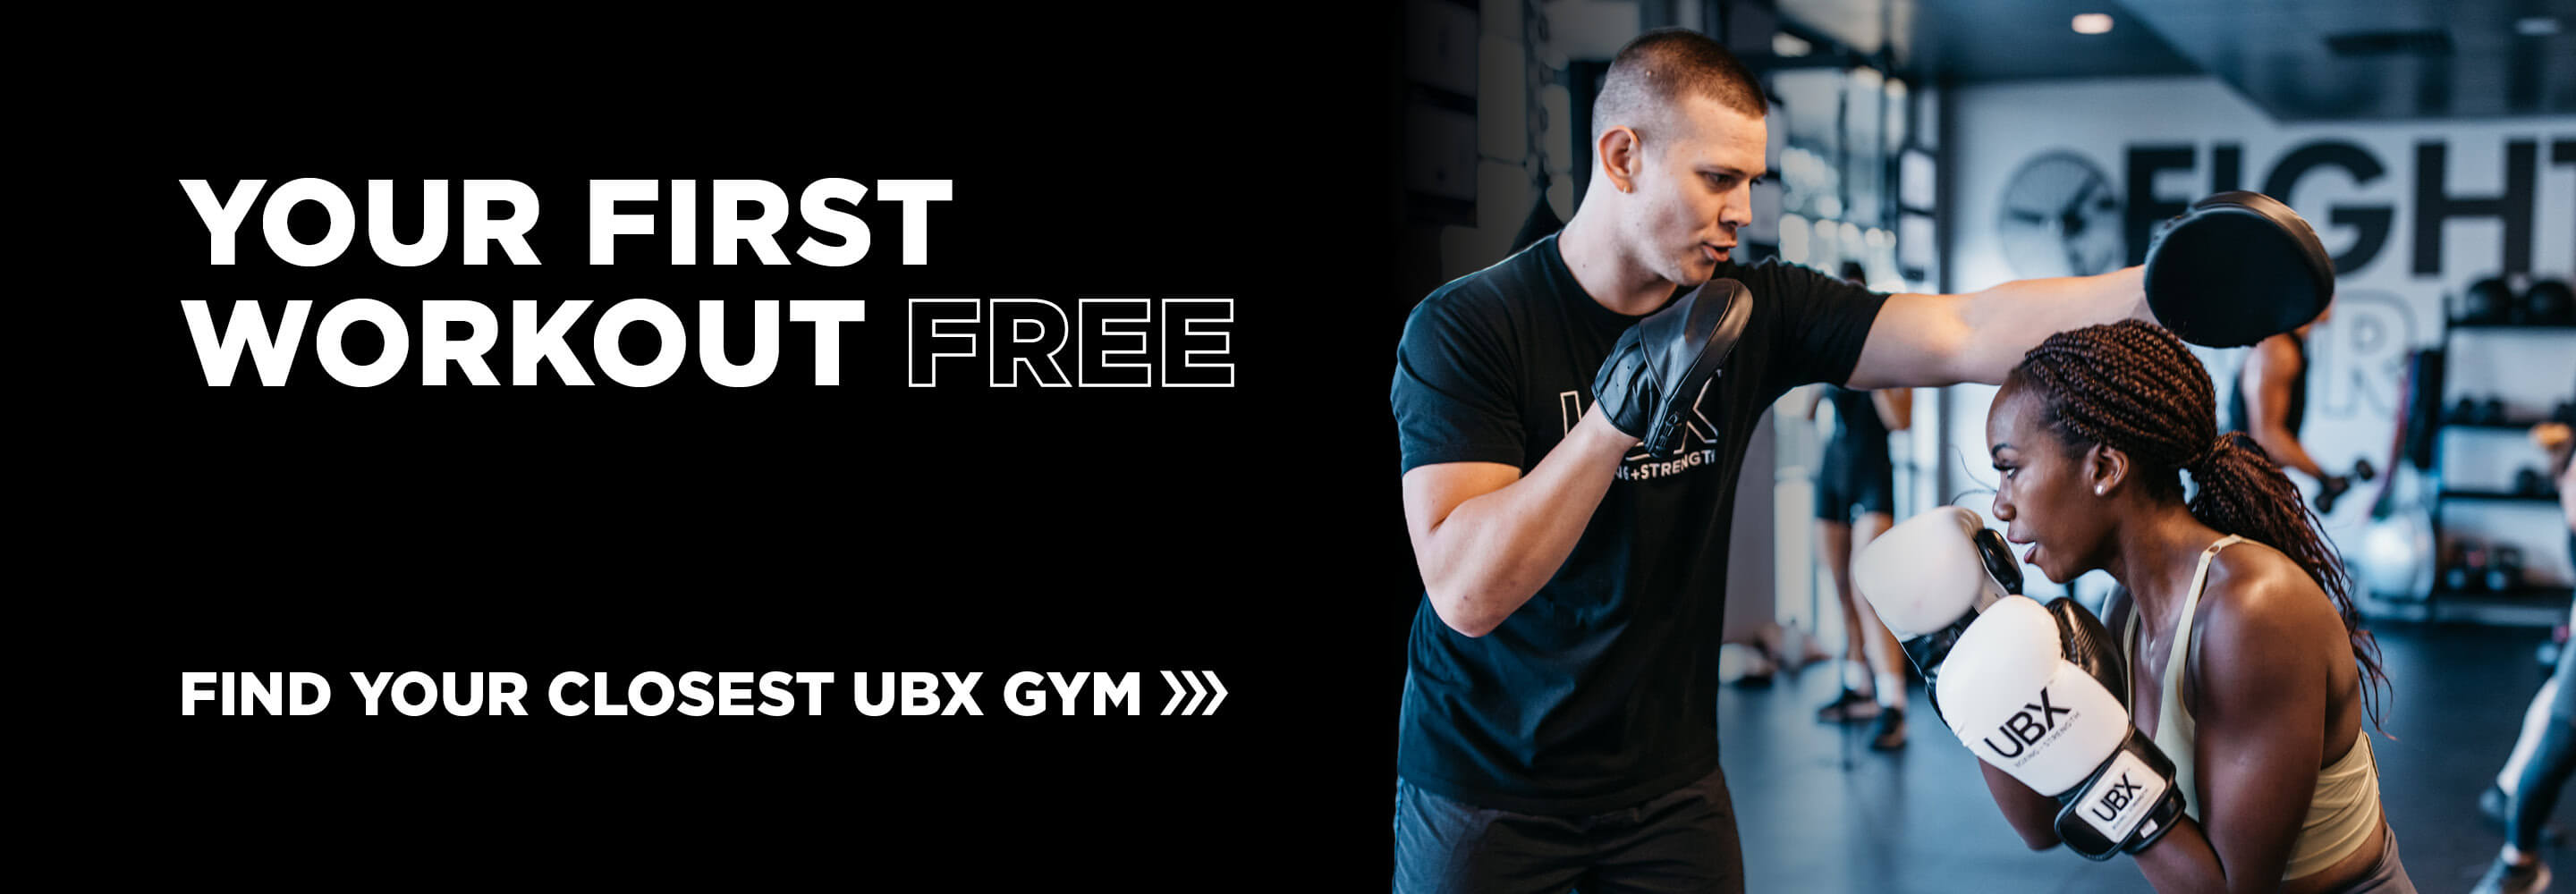 Your First Workout Free